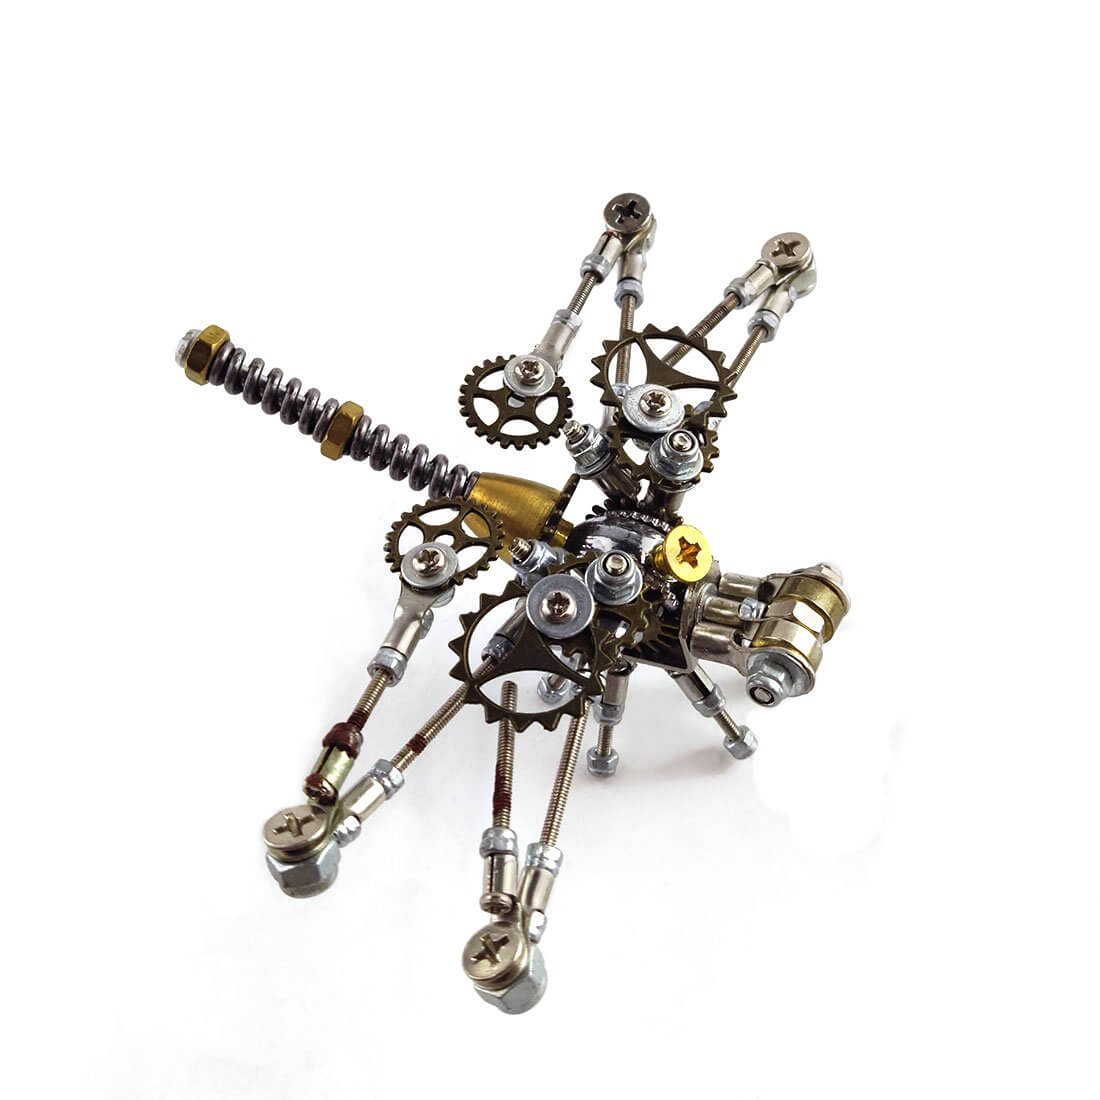 152Pcs 3D DIY Metal Mechanical Dragonfly Insect Puzzle Model Jigsaw